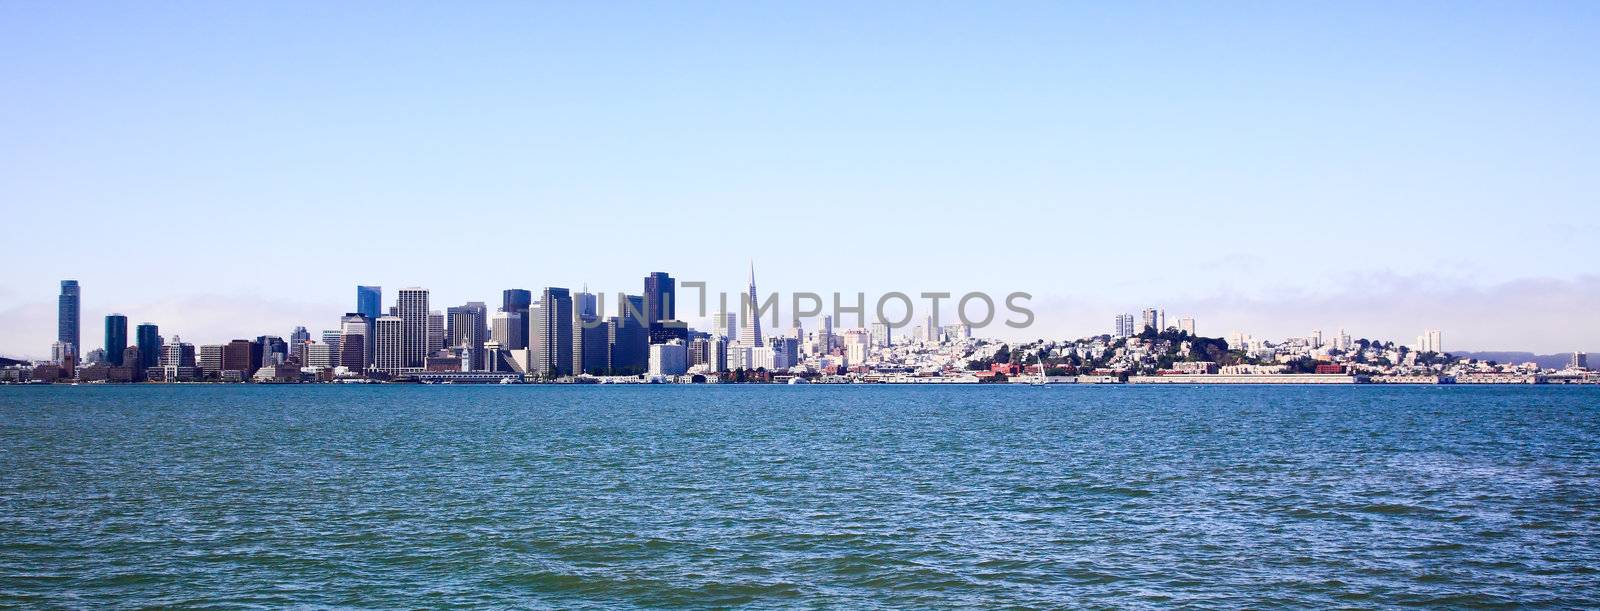 The San Francisco skylines by gary718